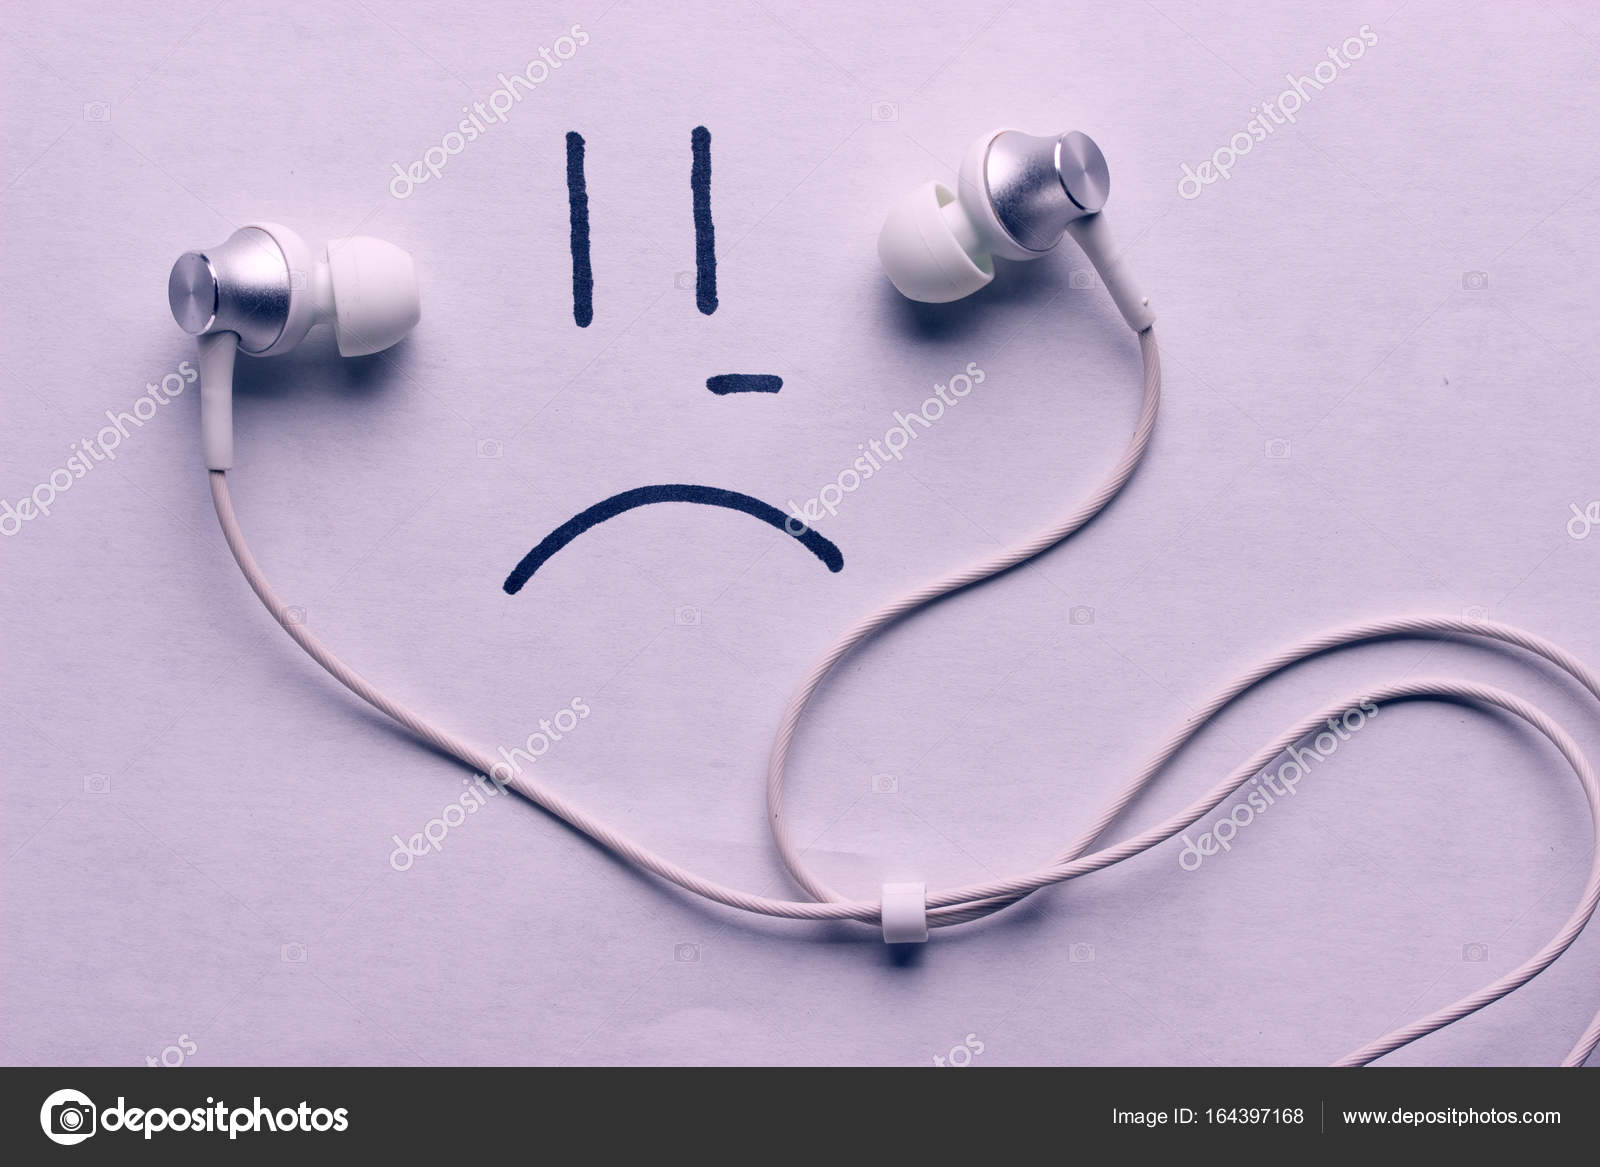 Listen To Sad Music Concept Stock Photo Poxnavsemail - sad song roblox id full song